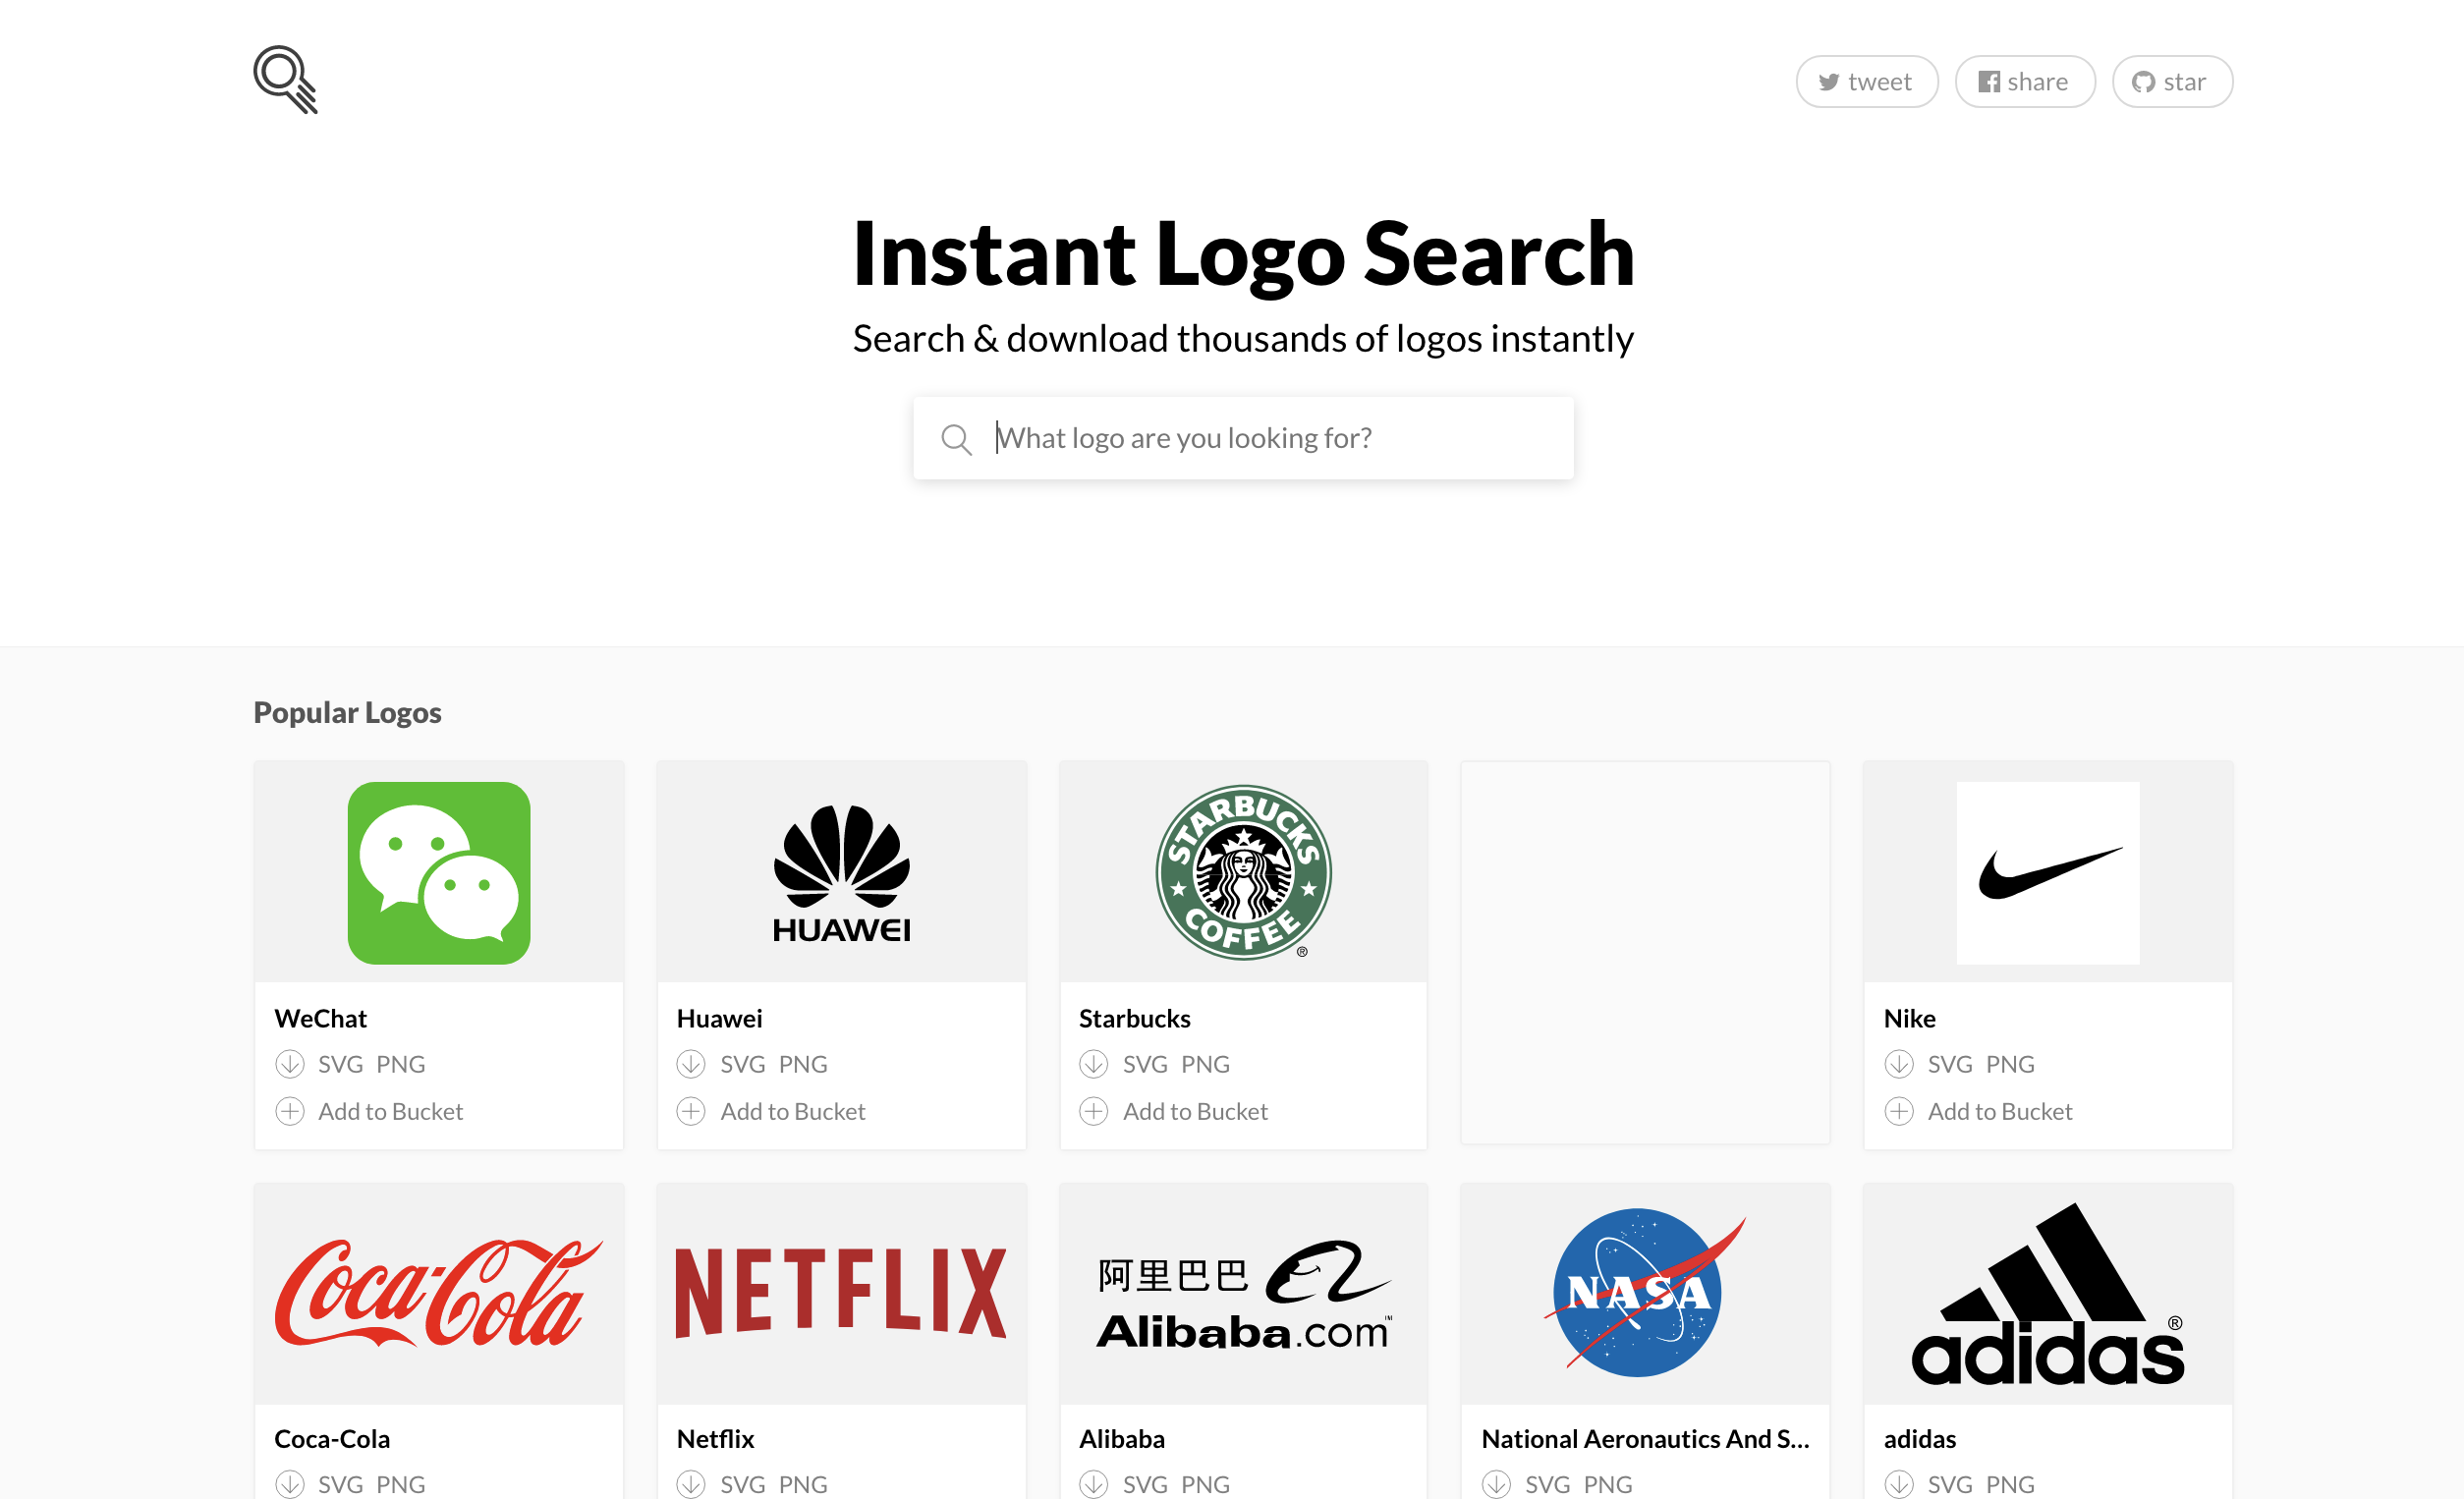 INSTANT LOGO SEARCH